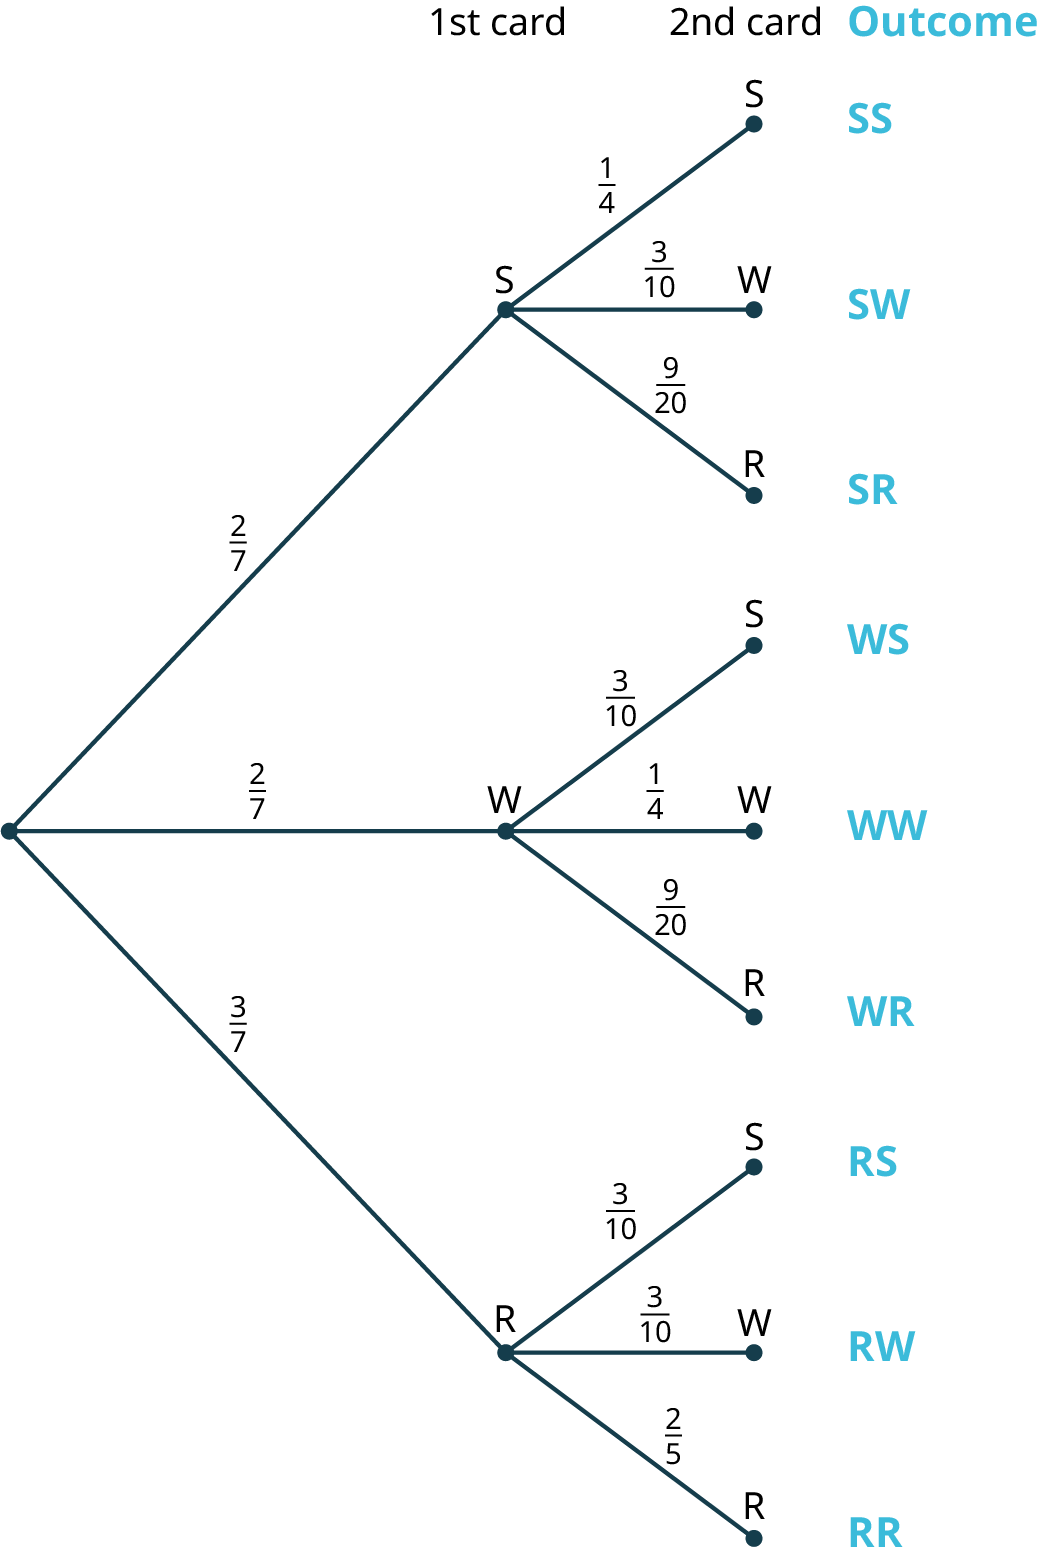 A tree diagram with three stages. The diagram shows a node in the first stage branching into three nodes labeled S, W, and R in the second stage with the probabilities, two-sevenths, two-sevenths, and three-sevenths, respectively. The second stage represents the first card. The third stage representing the second card is as follows. Node, S branches into three nodes labeled S, W, and R with the probabilities, one-fourth, three-tenths, and nine-twentieths. Node, W branches into three nodes labeled S, W, and R with the probabilities, three-tenths, one-fourth, and nine-twentieths. The node, R branches into three nodes labeled S, W, and R with the probabilities, three-tenths, three-tenths, and two-fifths. The possible outcomes are as follows: S S, S W, S R, W S, W W, W R, R S, R W, and R R.